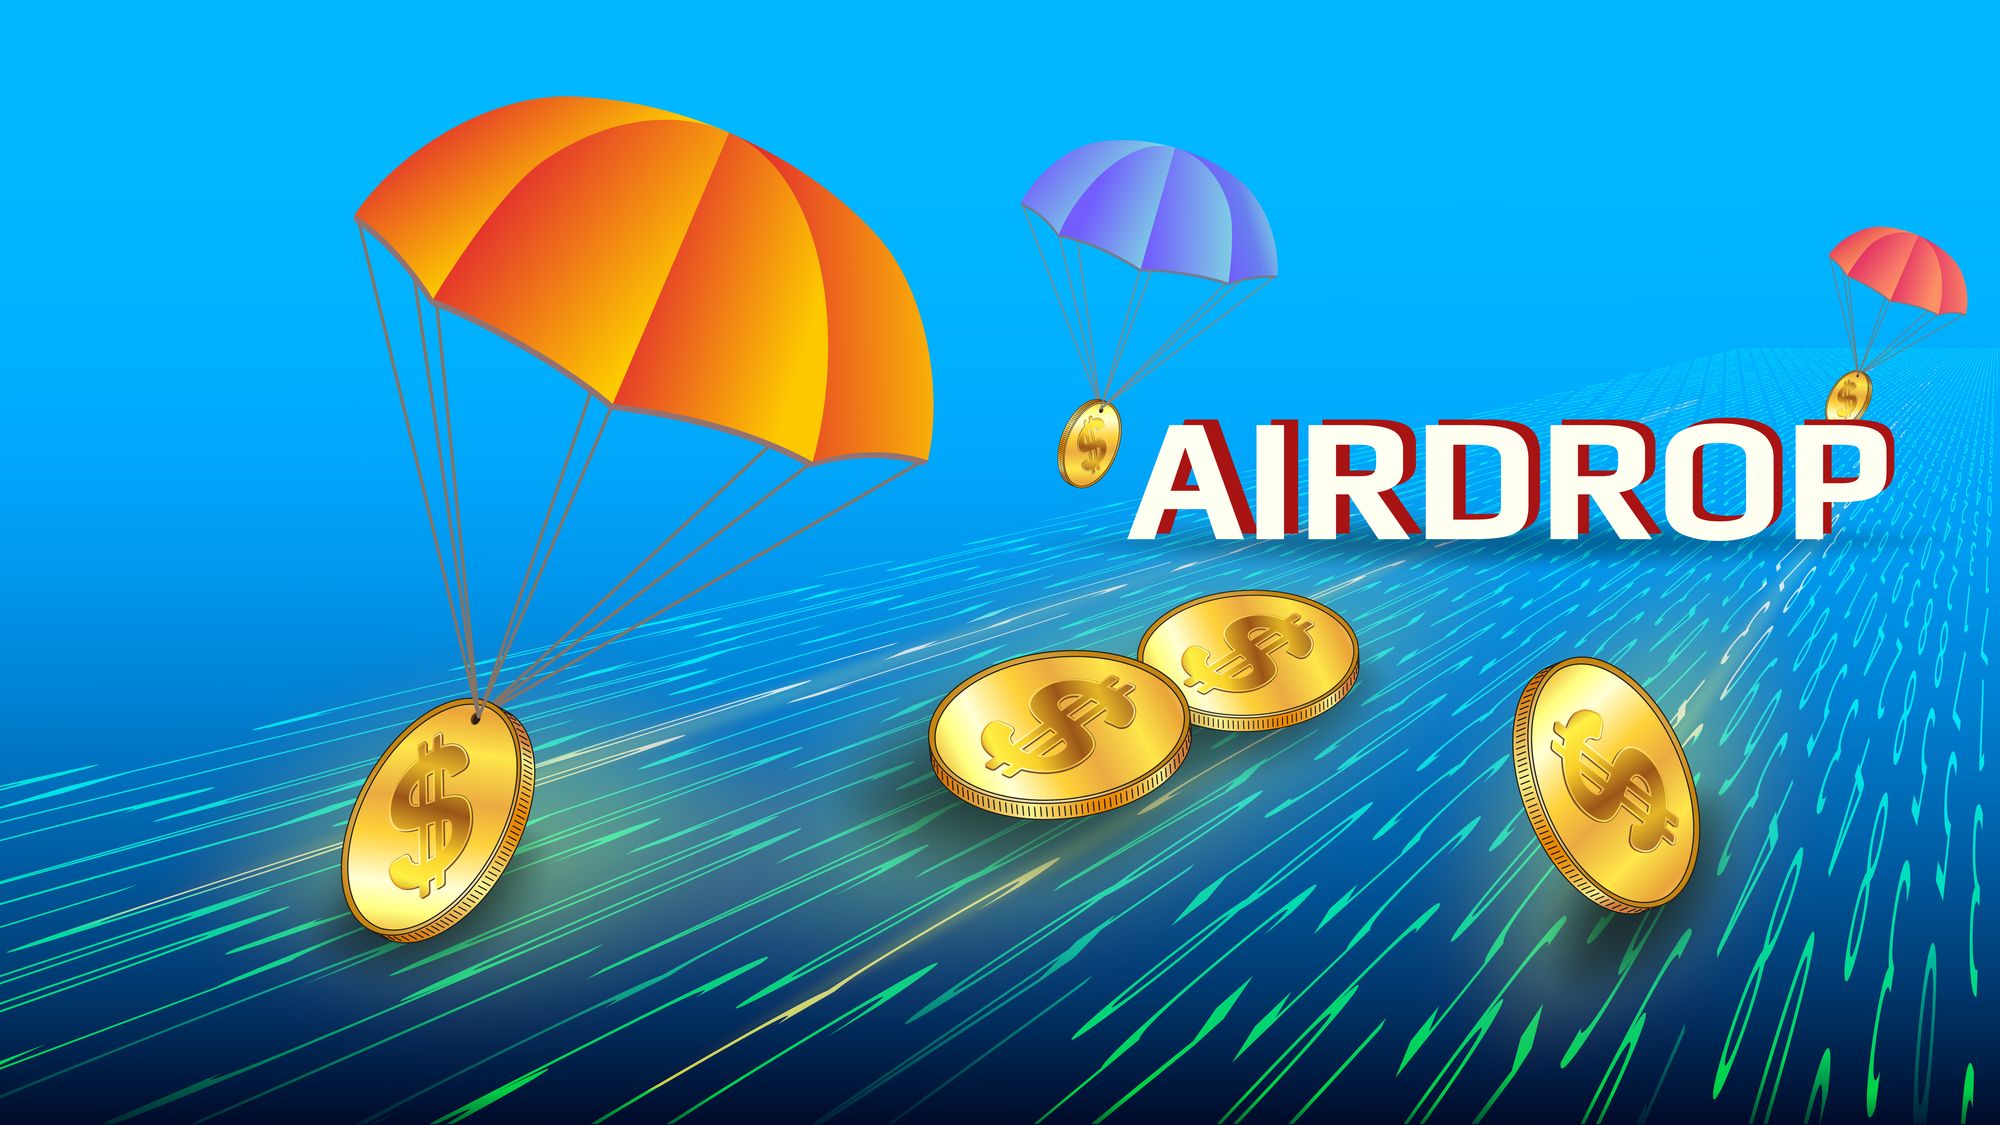 What is Airdrop?